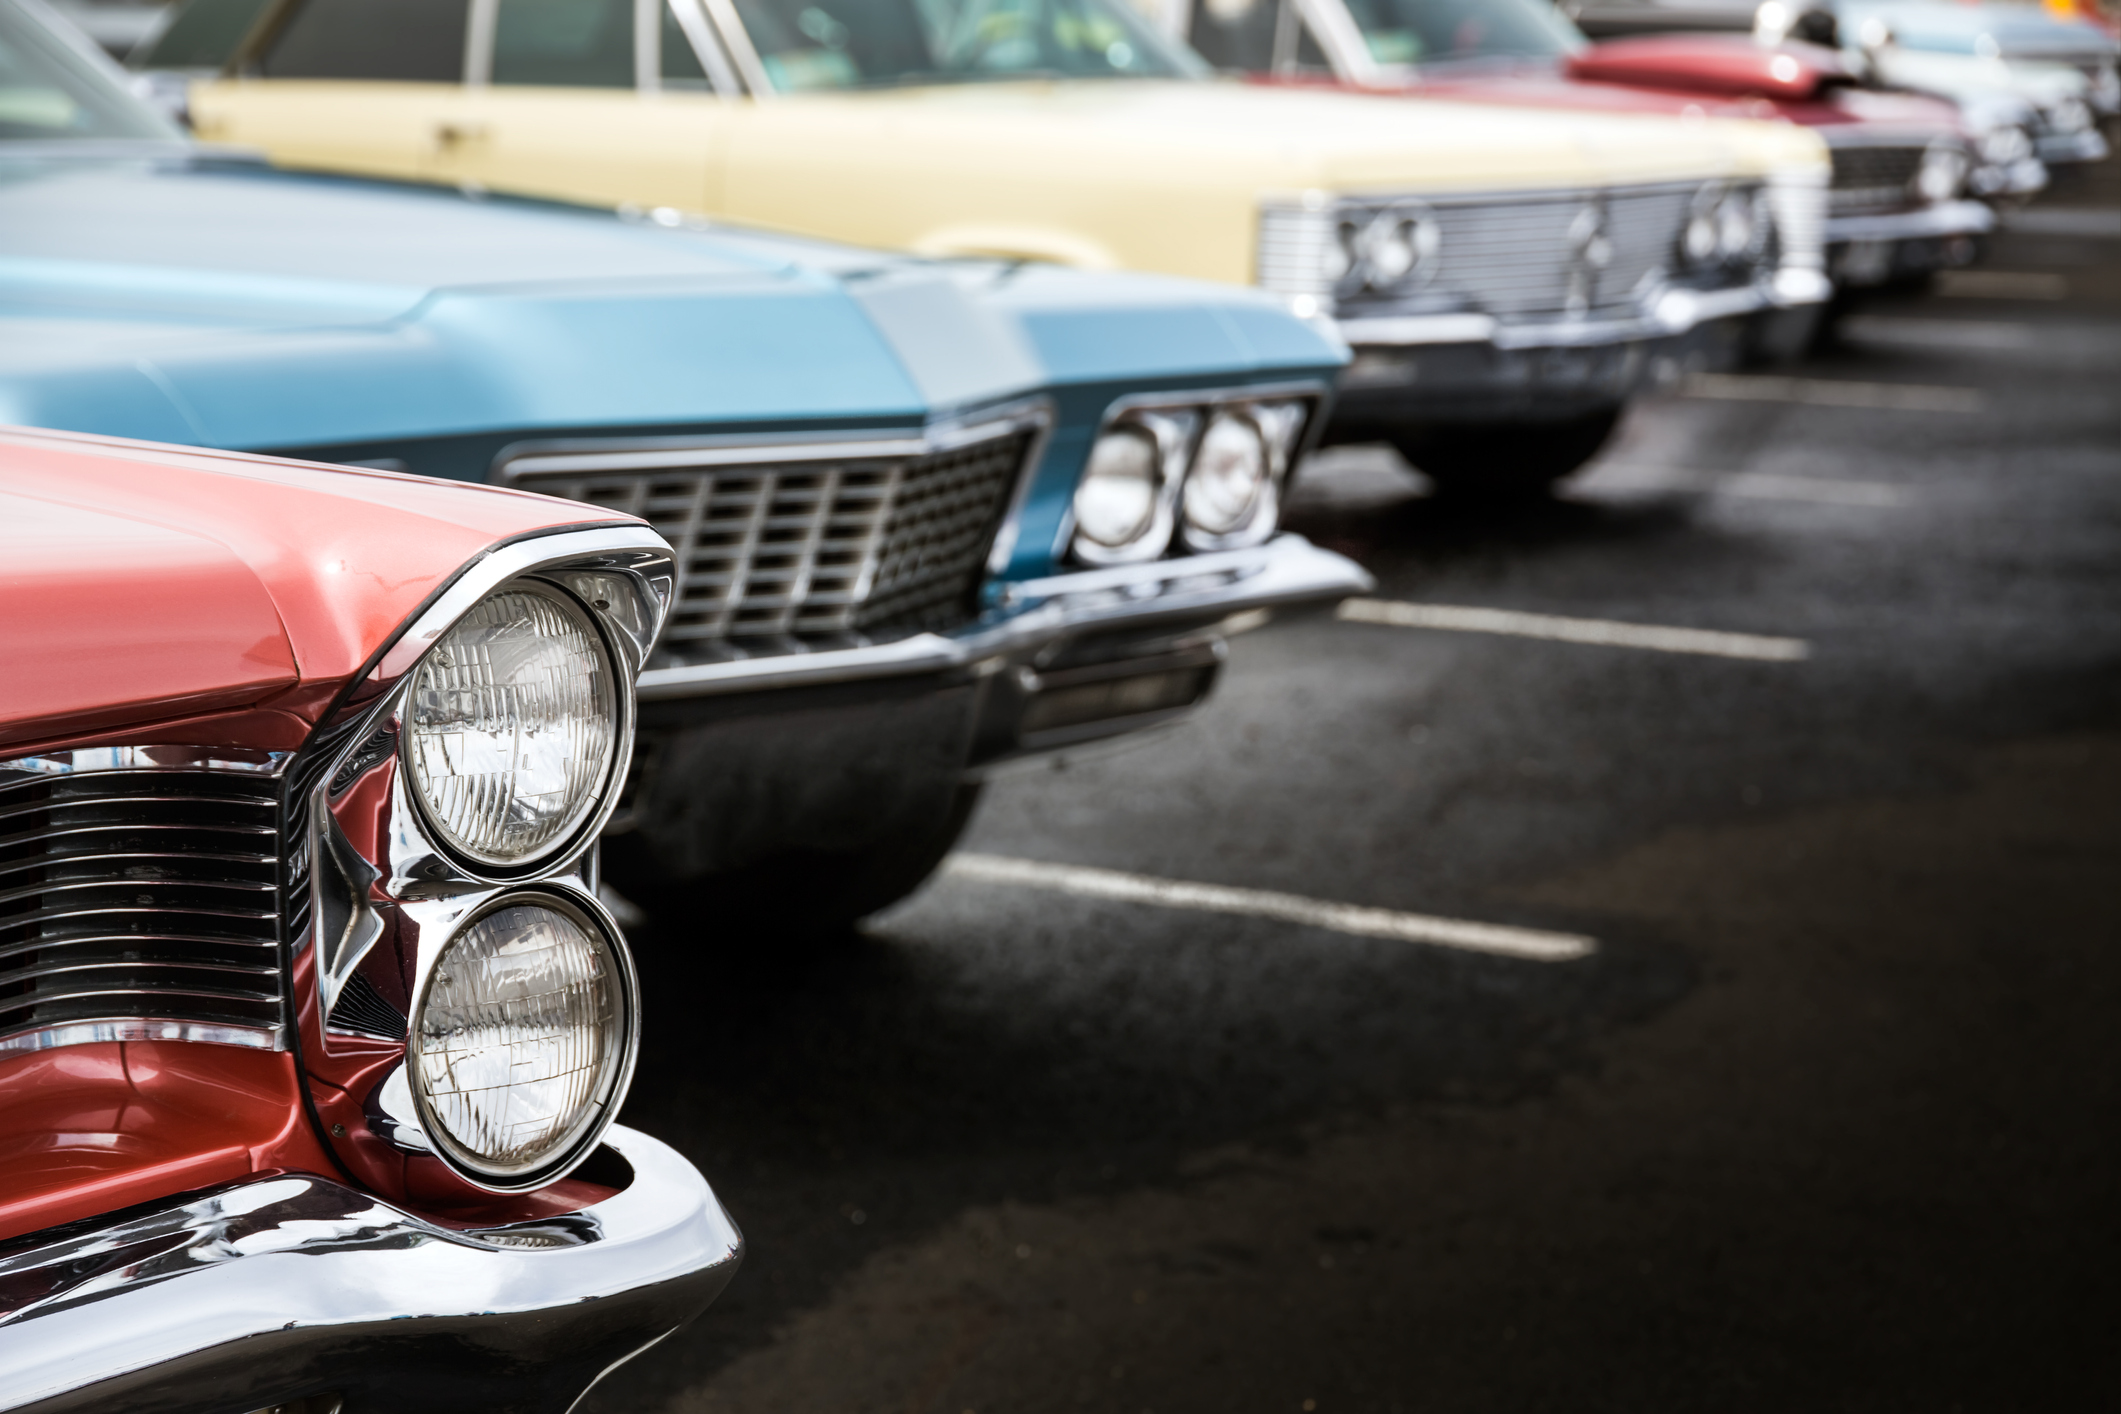 Check out classic cars at this weekend's Hamptons car show